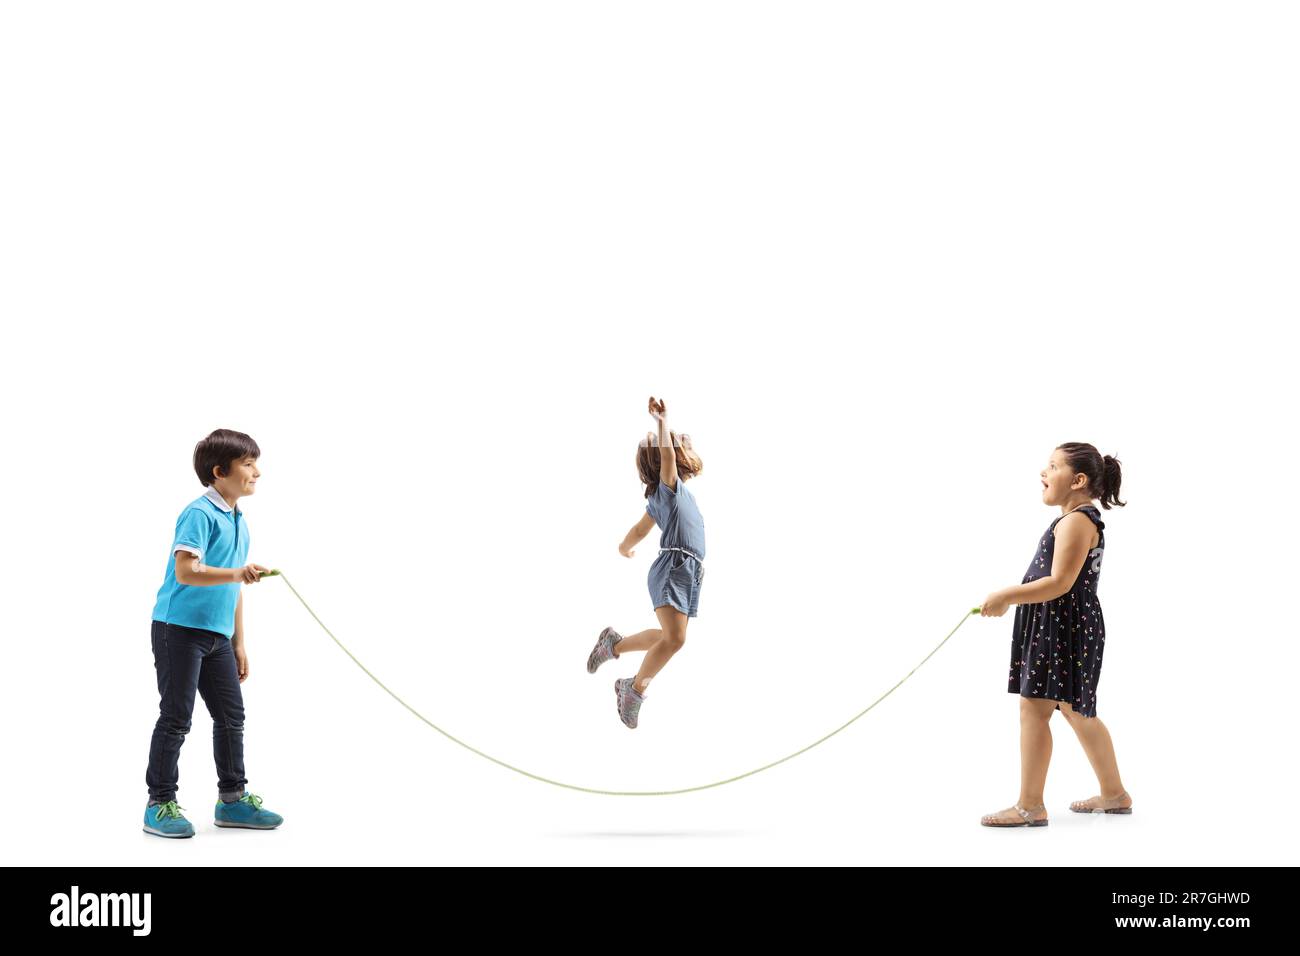 Full length profile shot of a boy and two girls playing skipping rope isolated on white background Stock Photo